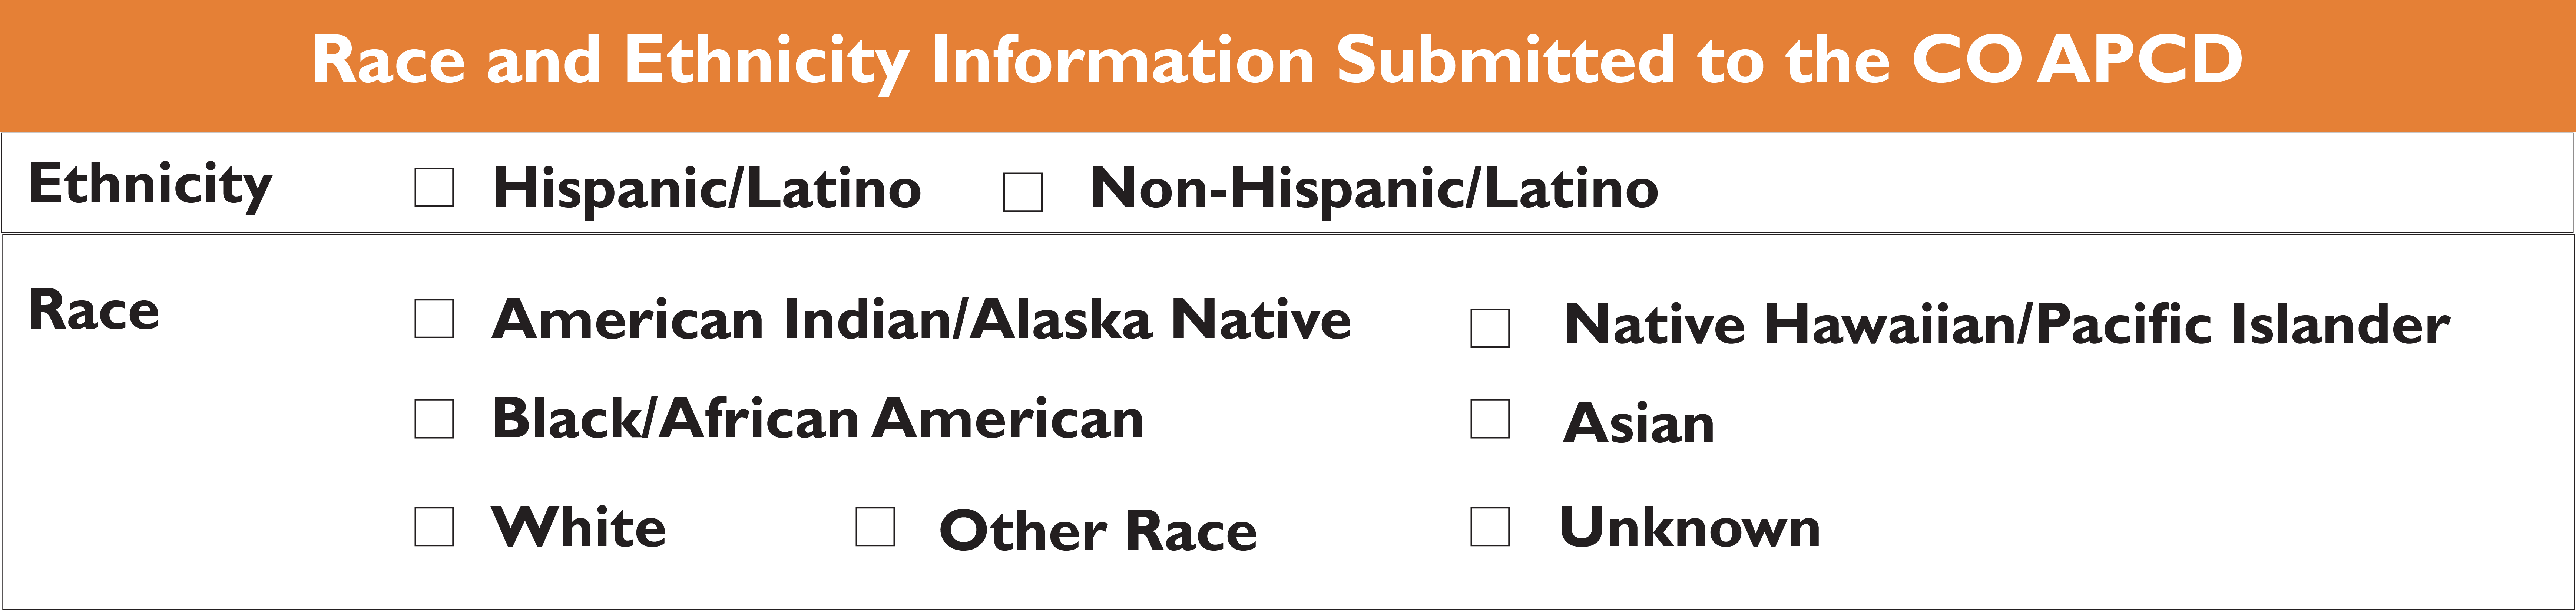 A sample submission field for Race and Ethnicity Information in the CO APCD. In the ethnicity fields, providers indicate whether a patient is Hispanic/Latino or Non-Hispanic/Latino. In the race fields, a provider has seven identification fields: - American Indian/Alaska Native - Native Hawaiian/Pacific Islander - Black/African American - Asian - White -Other - Unkown